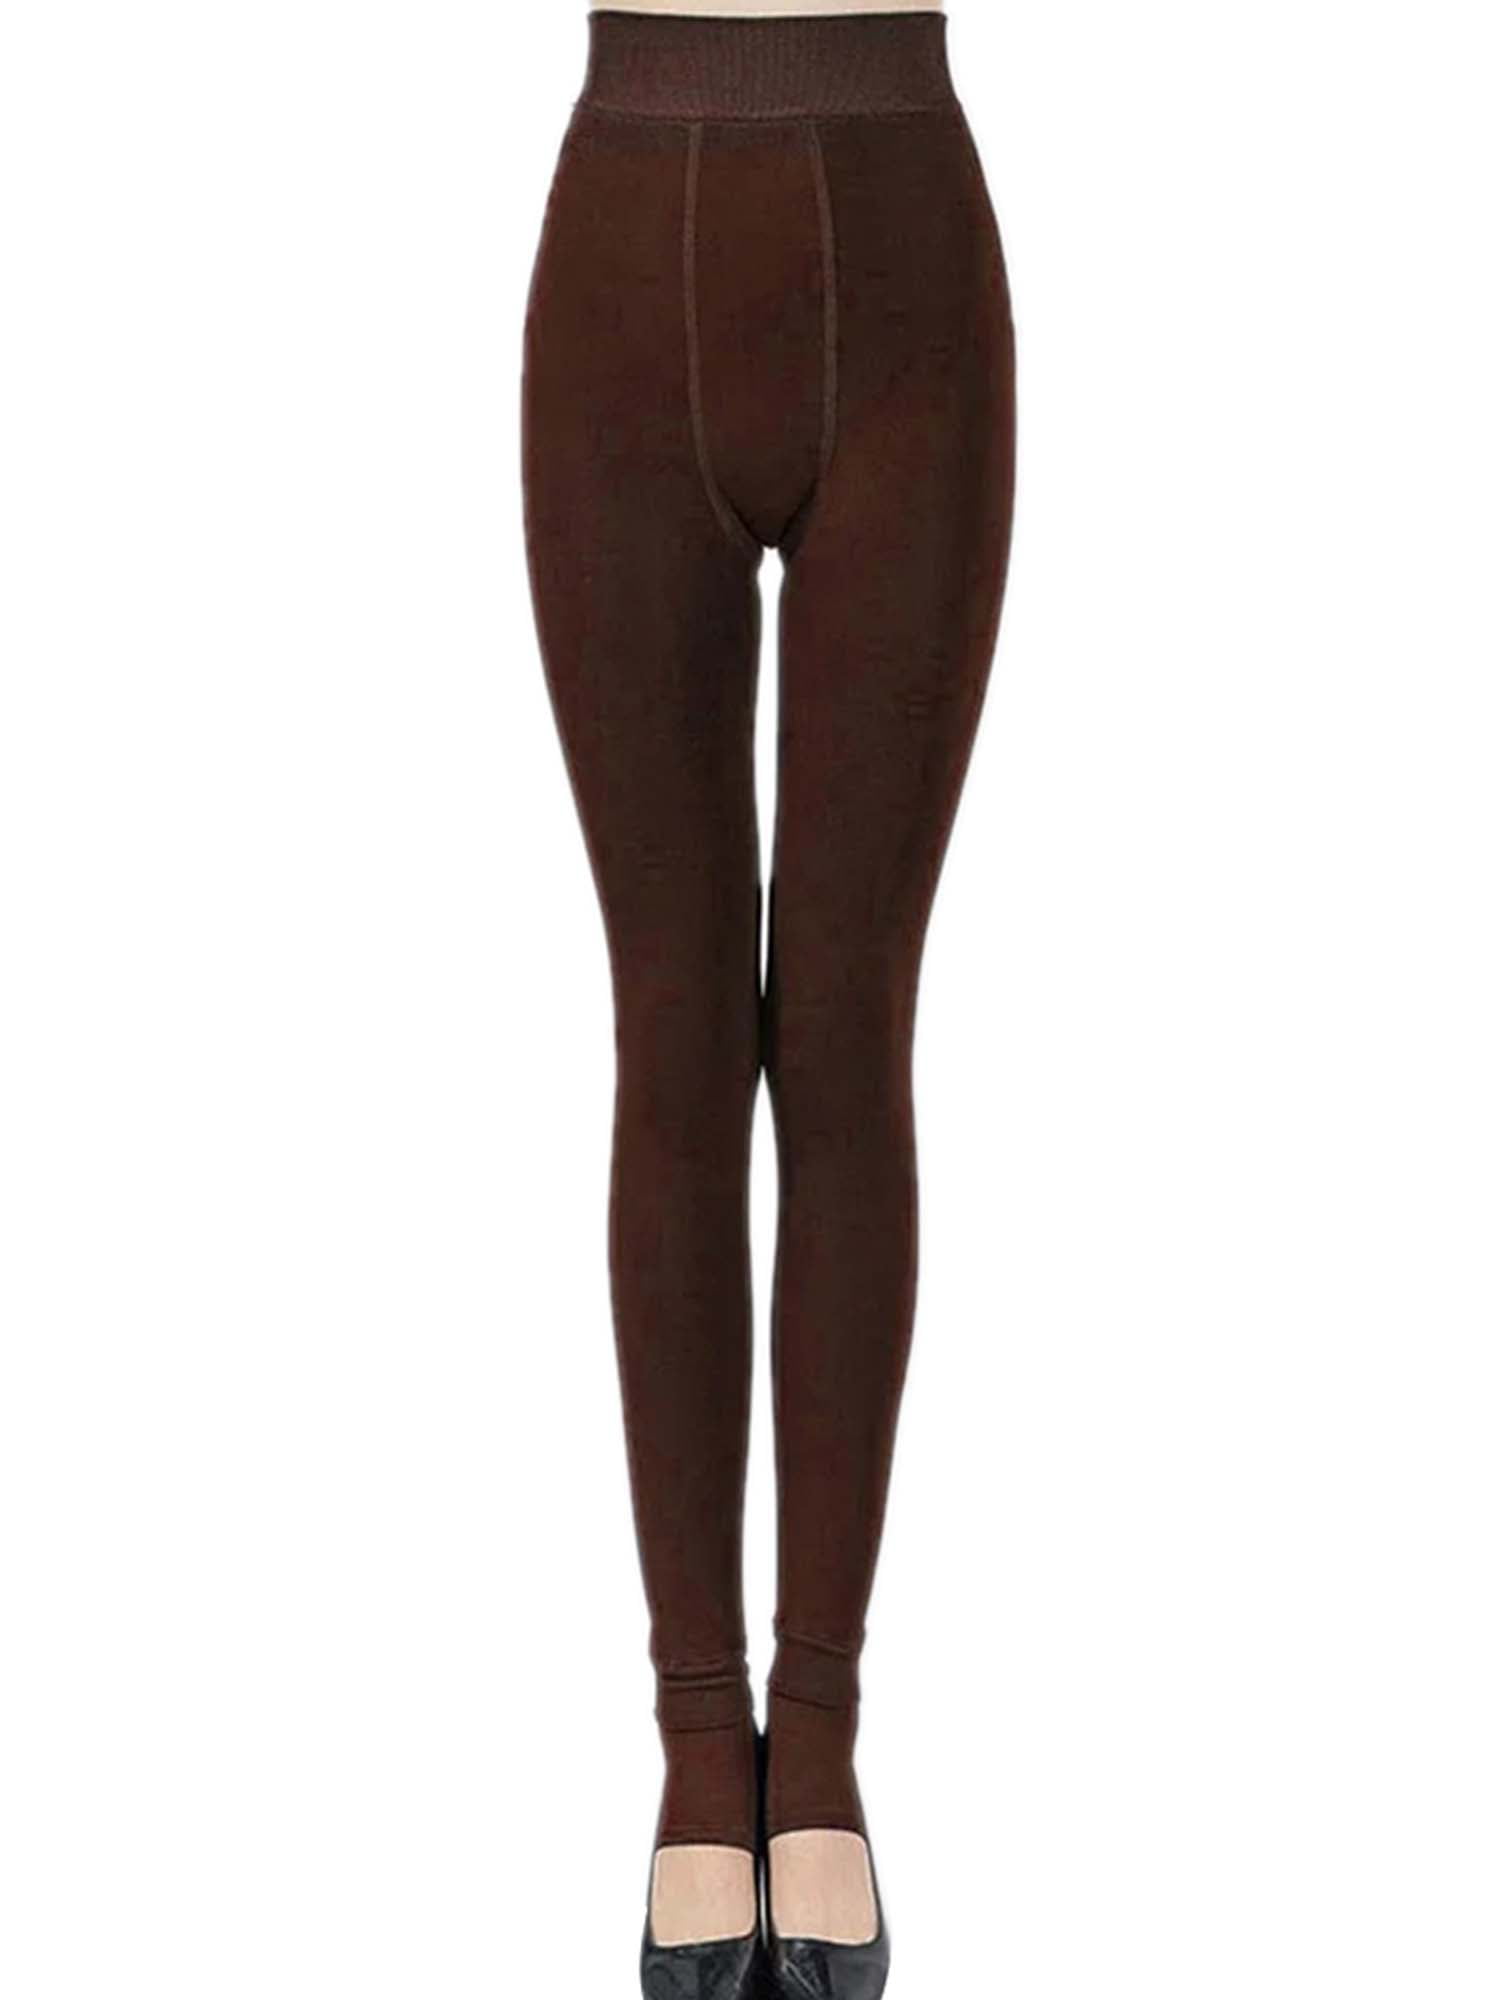 wybzd Women's Winter Thick Warm Fleece Lined Thermal Tights Stretchy  Leggings Pants Full Length Stockings Brown 